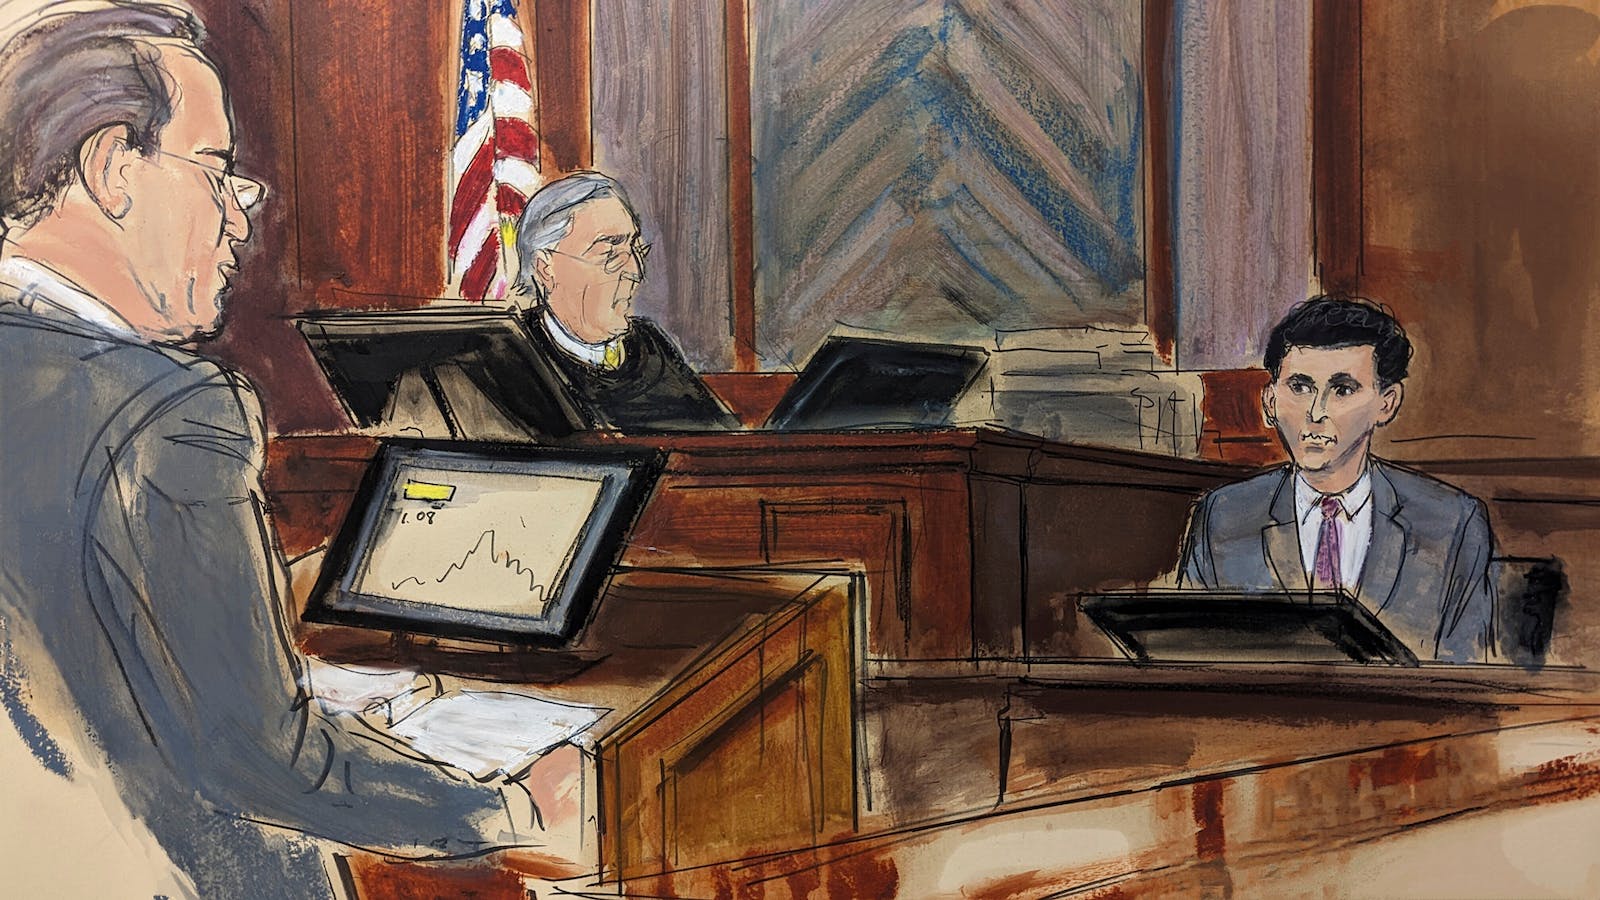 Sam Bankman-Fried is questioned by his attorney Mark Cohen, left, as Judge Lewis Kaplan looks on from the bench as Bankman-Fried testifies in his trial at Manhattan federal court on Friday. Sketch by Elizabeth Williams via AP.